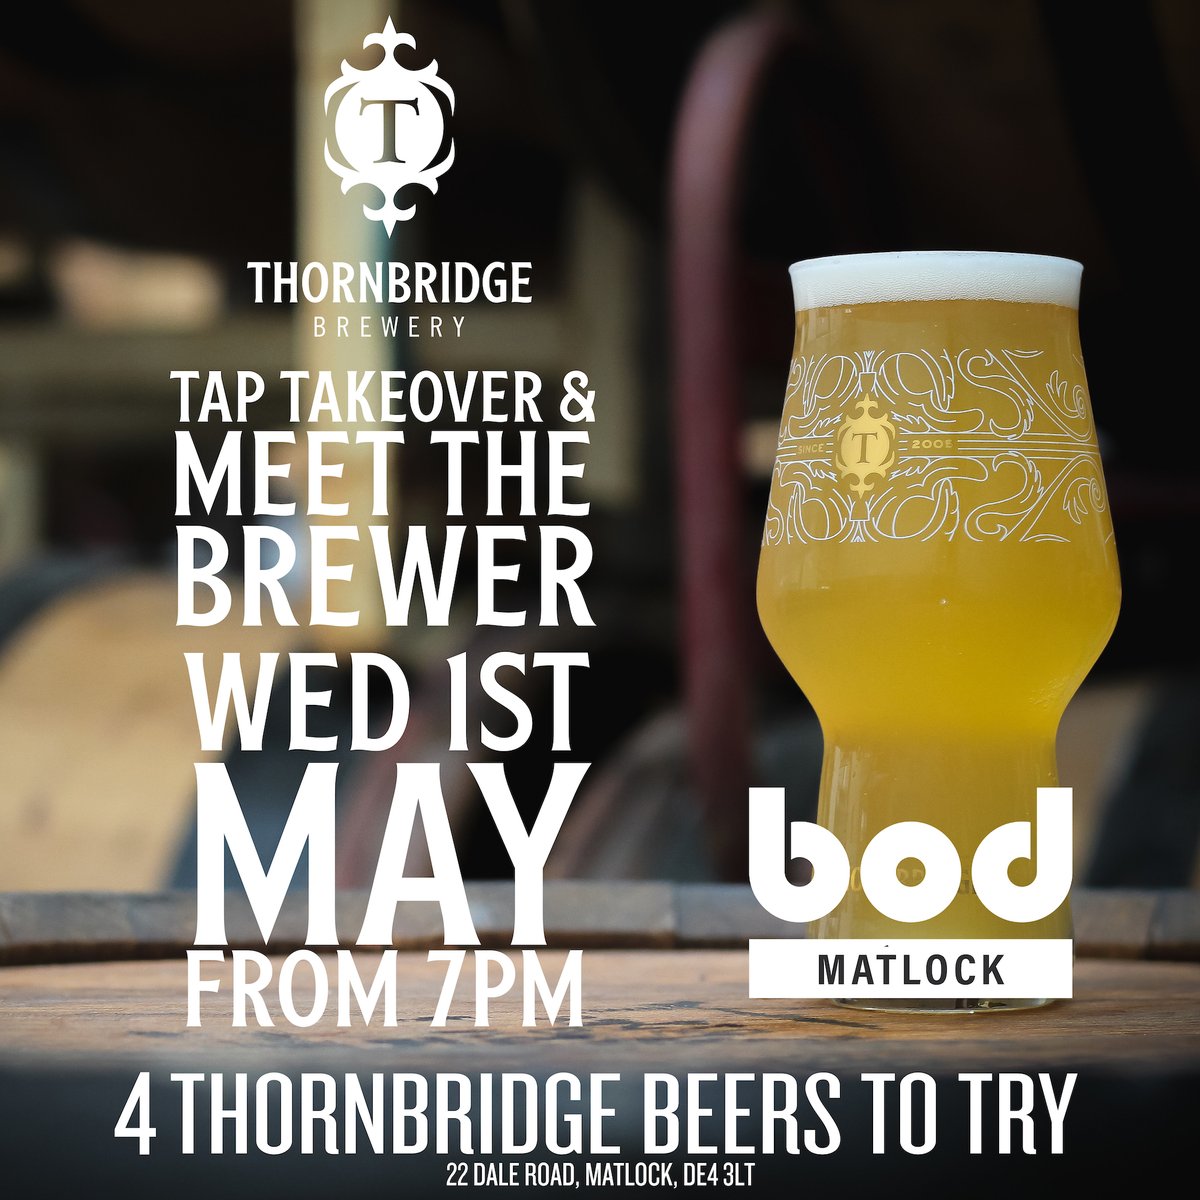 Bod Matlock x @thornbridge Tap Takeover bod Matlock will be hosting a Thornbridge Tap Takeover this week alongside a Meet The Brewer event tomorrow from 7pm! Expect the bar to be pouring Thornbridge beers as well as a pizza special from the kitchen! #taptakeover